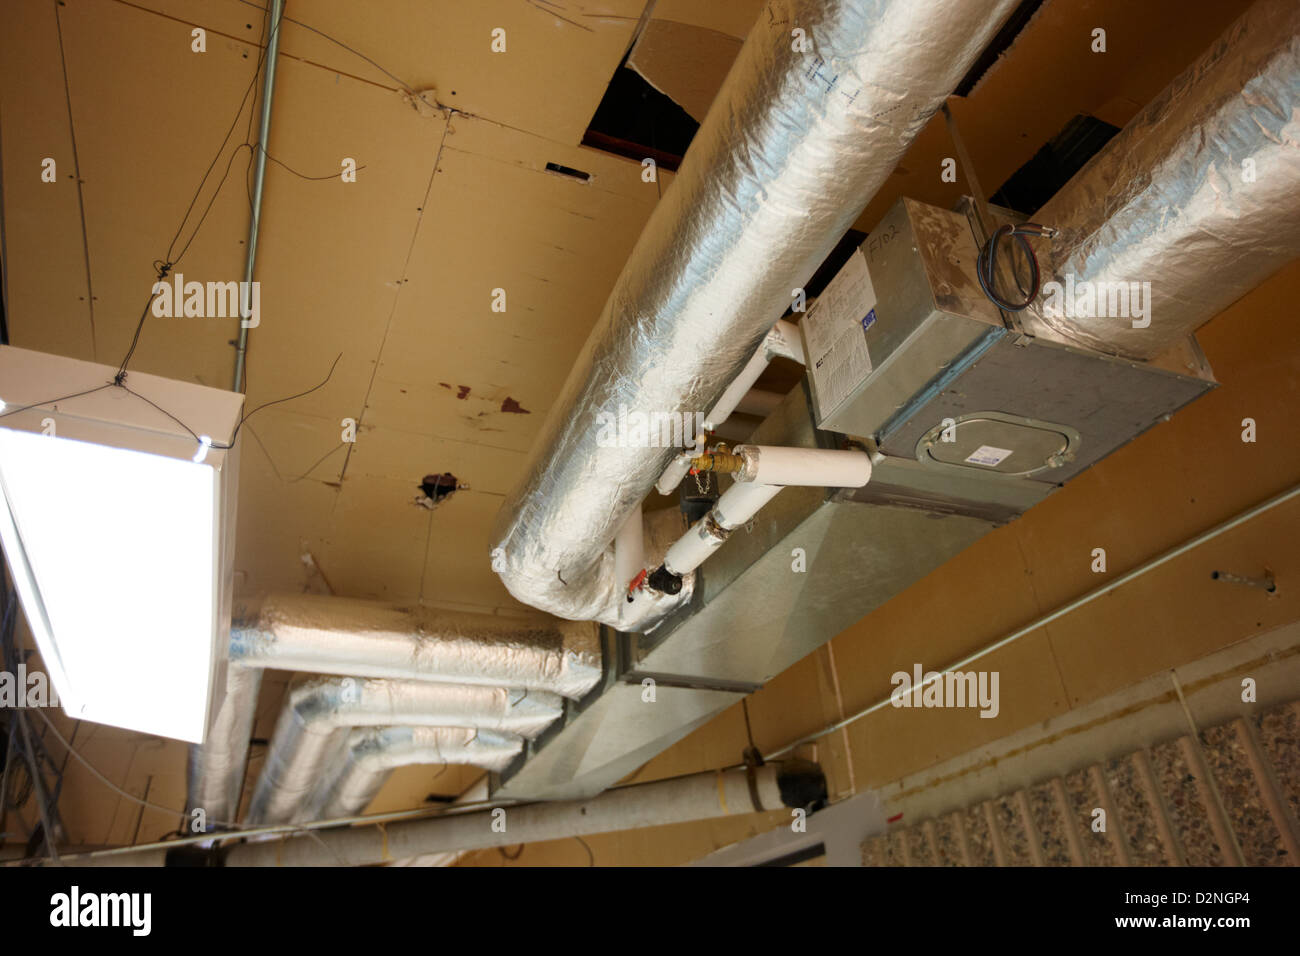 exposed insulated heating and ventilation ducts High school canada north america Stock Photo